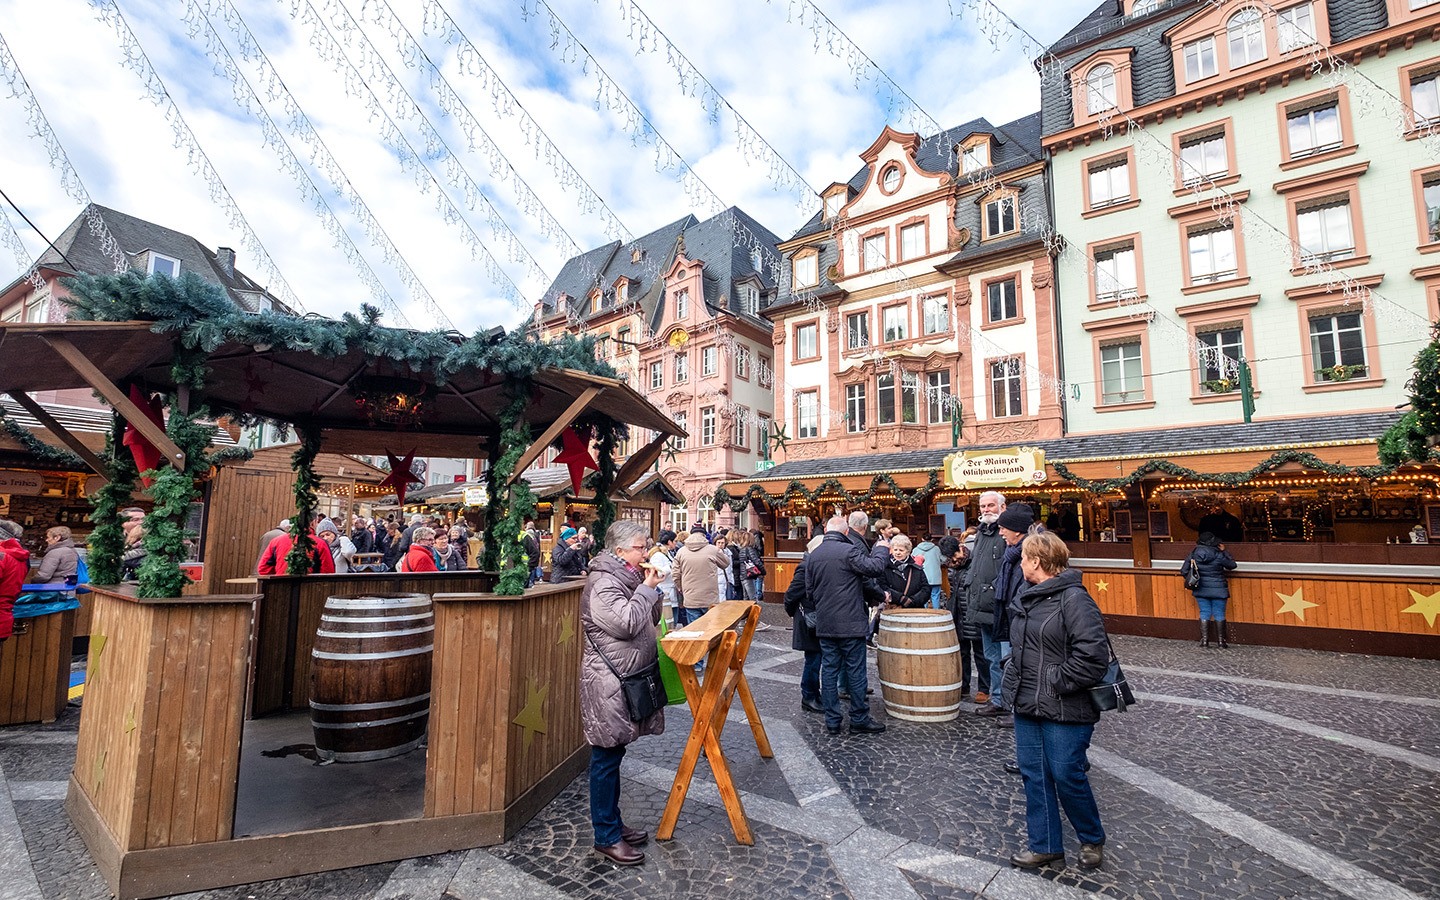 A Christmas market river cruise on the Rhine